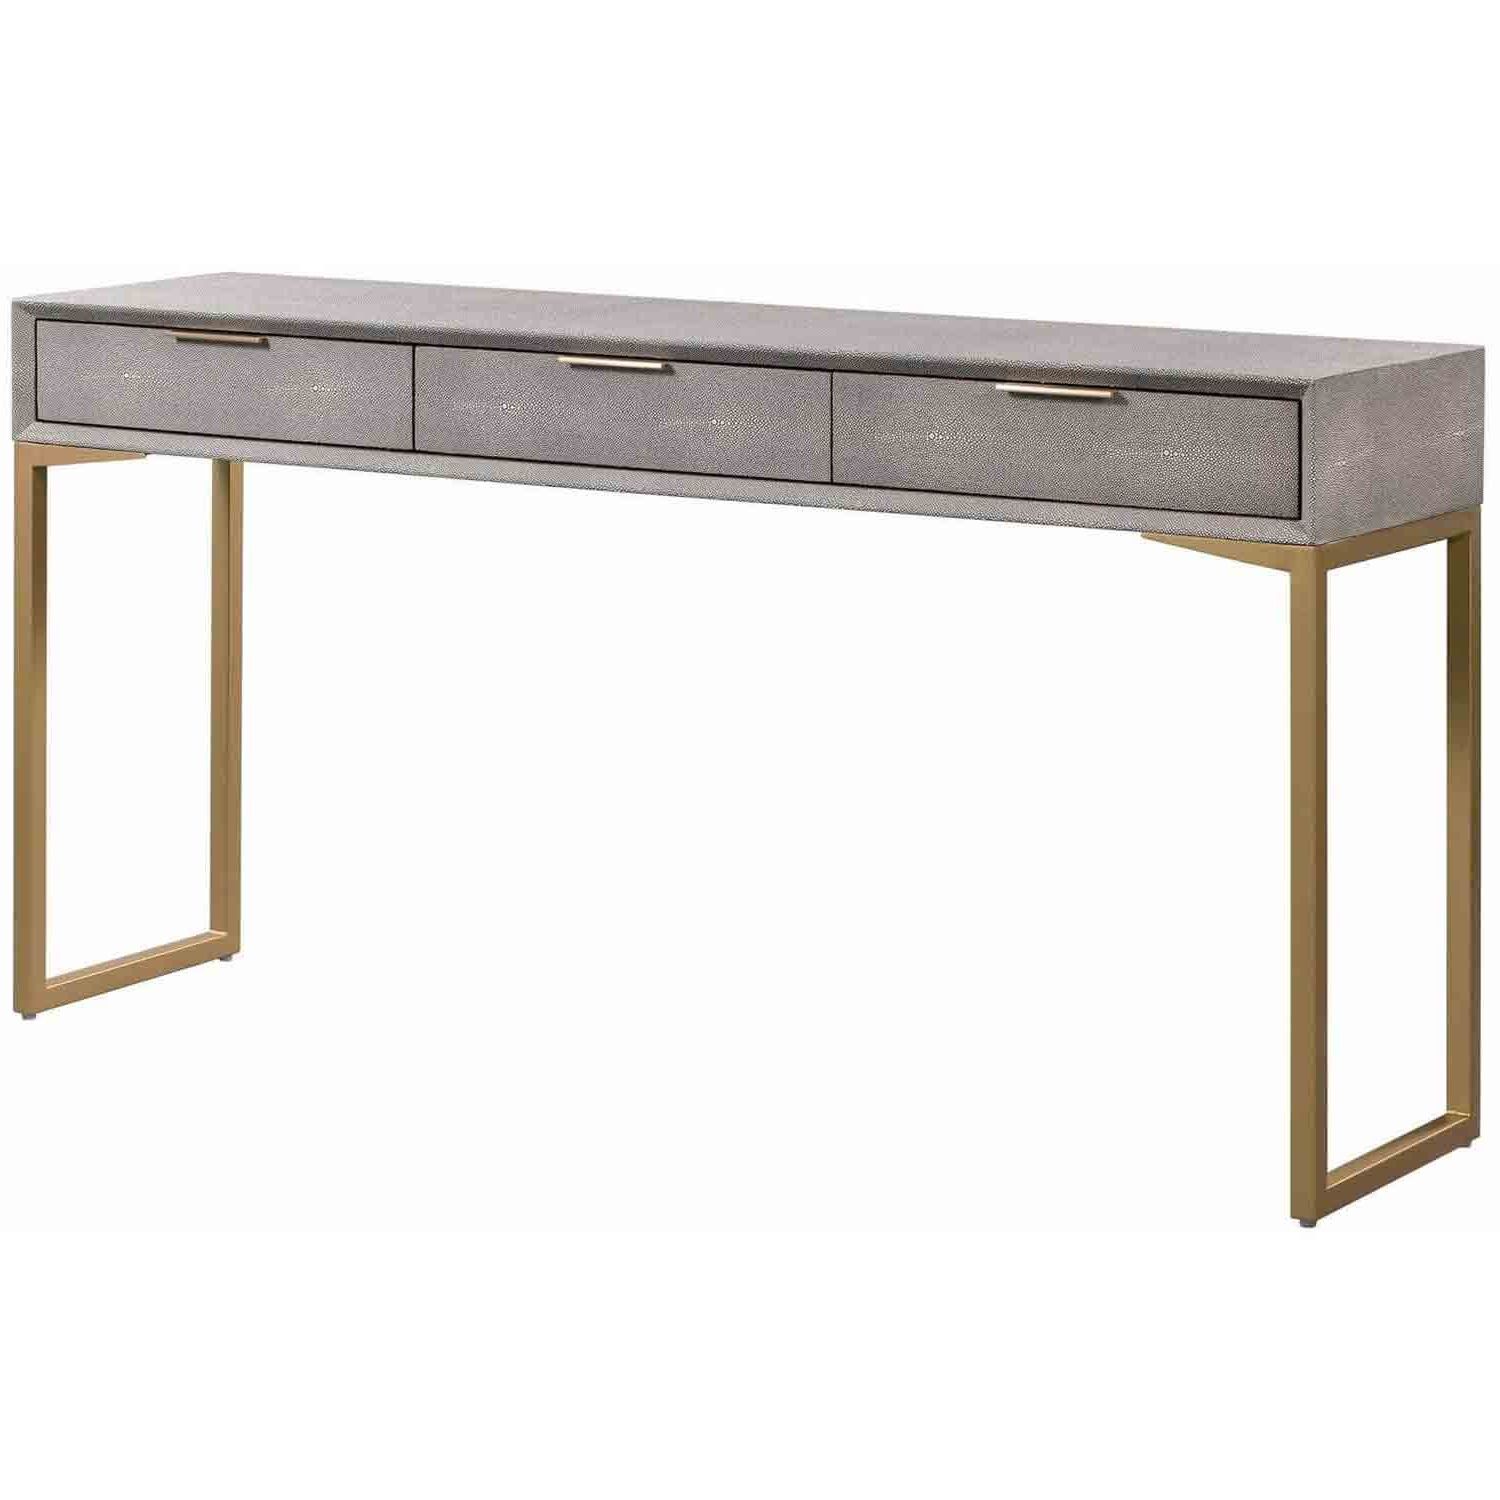 Pesce Shagreen Console – Console Tables – Accent Tables – Furniture With Regard To Grey Shagreen Media Console Tables (View 16 of 20)